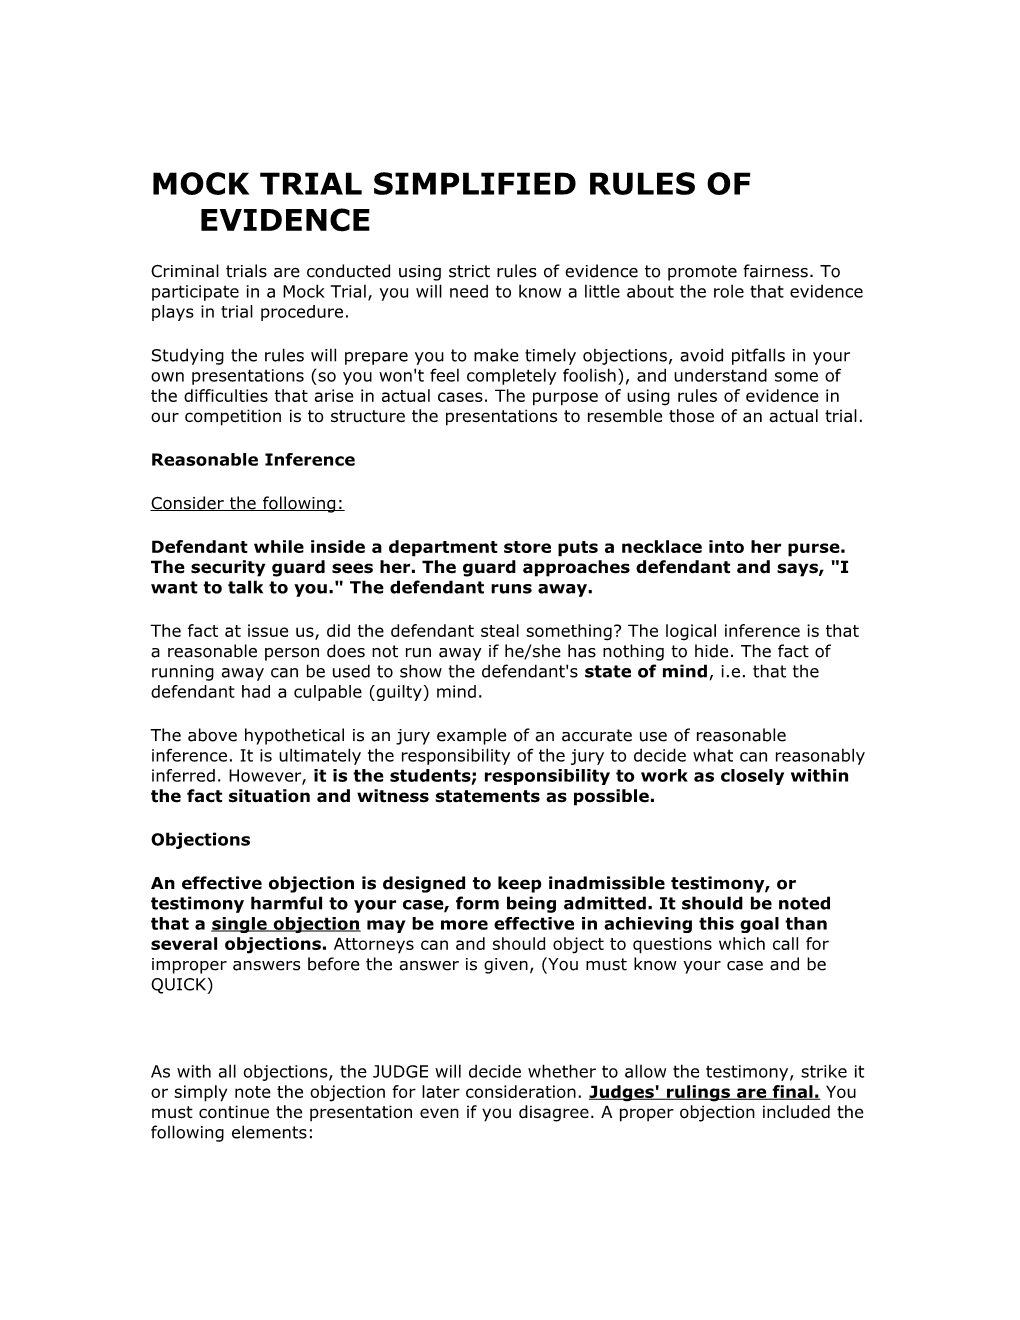 Mock Trial Simplified Rules of Evidence